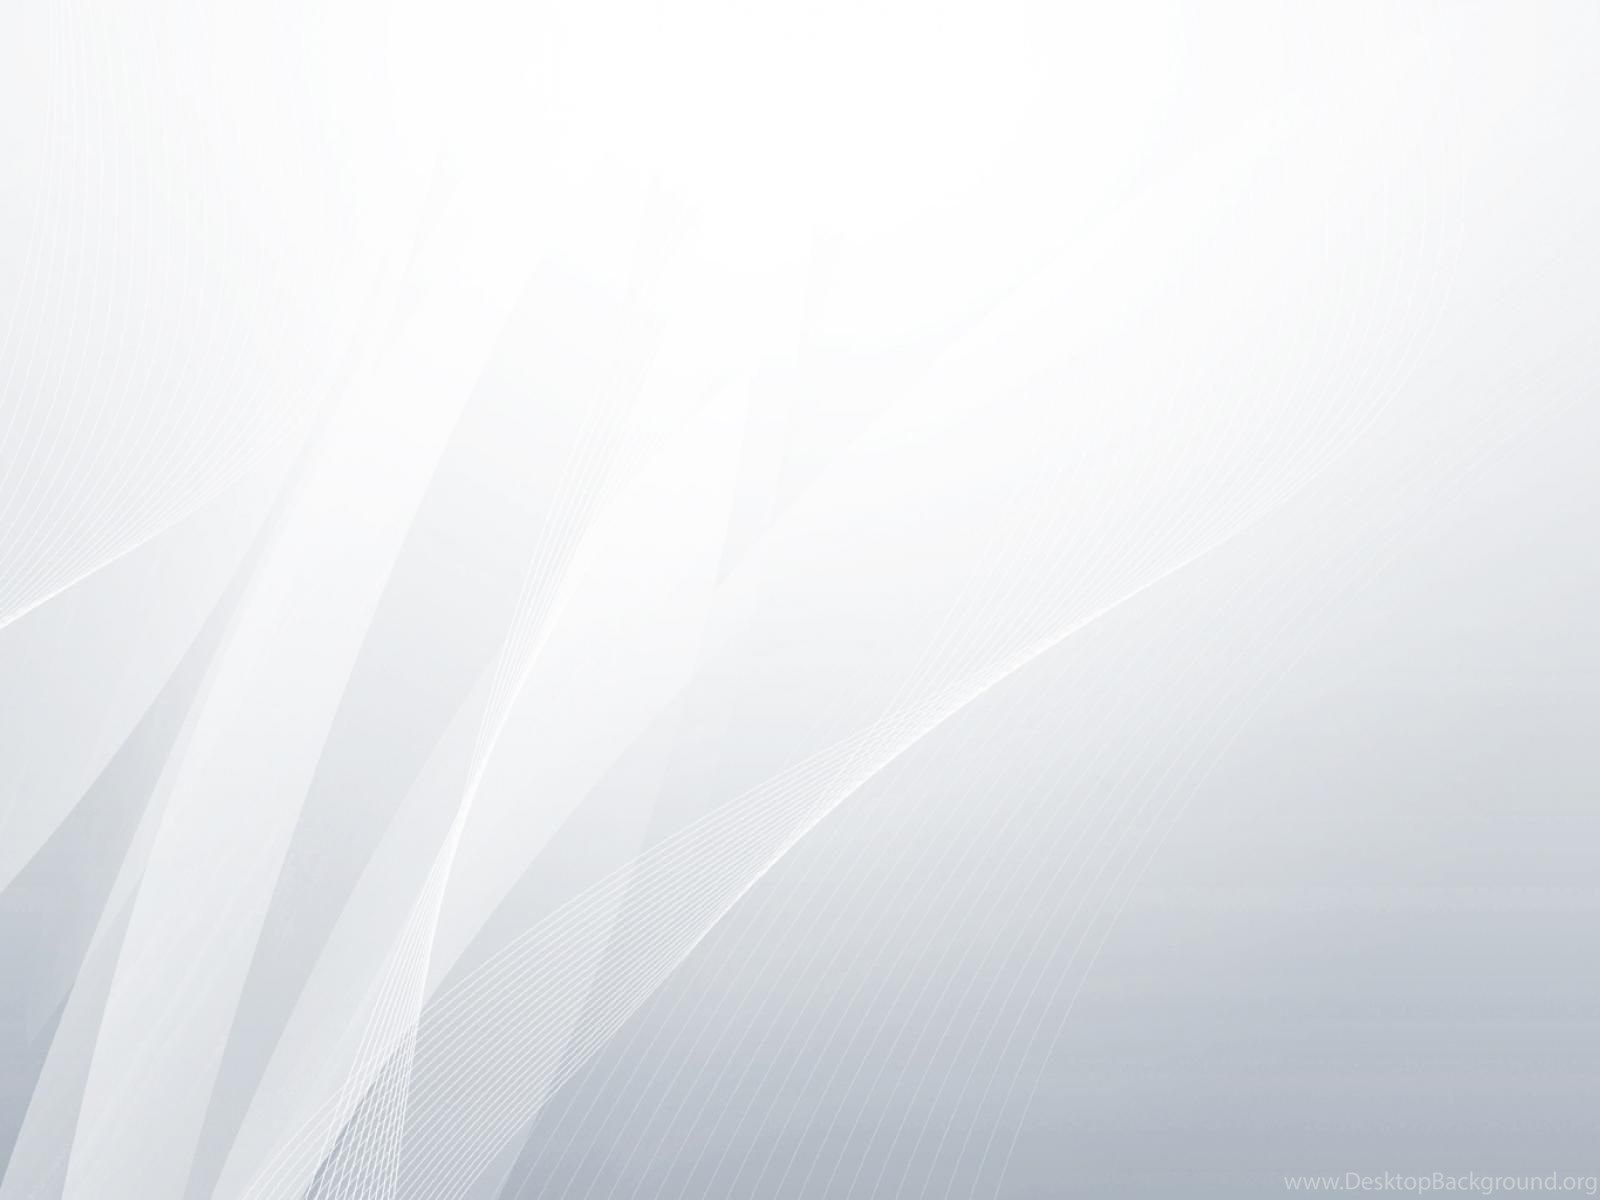 Gray Abstract Background HD Wallpaper On Picsfair.com Desktop Background